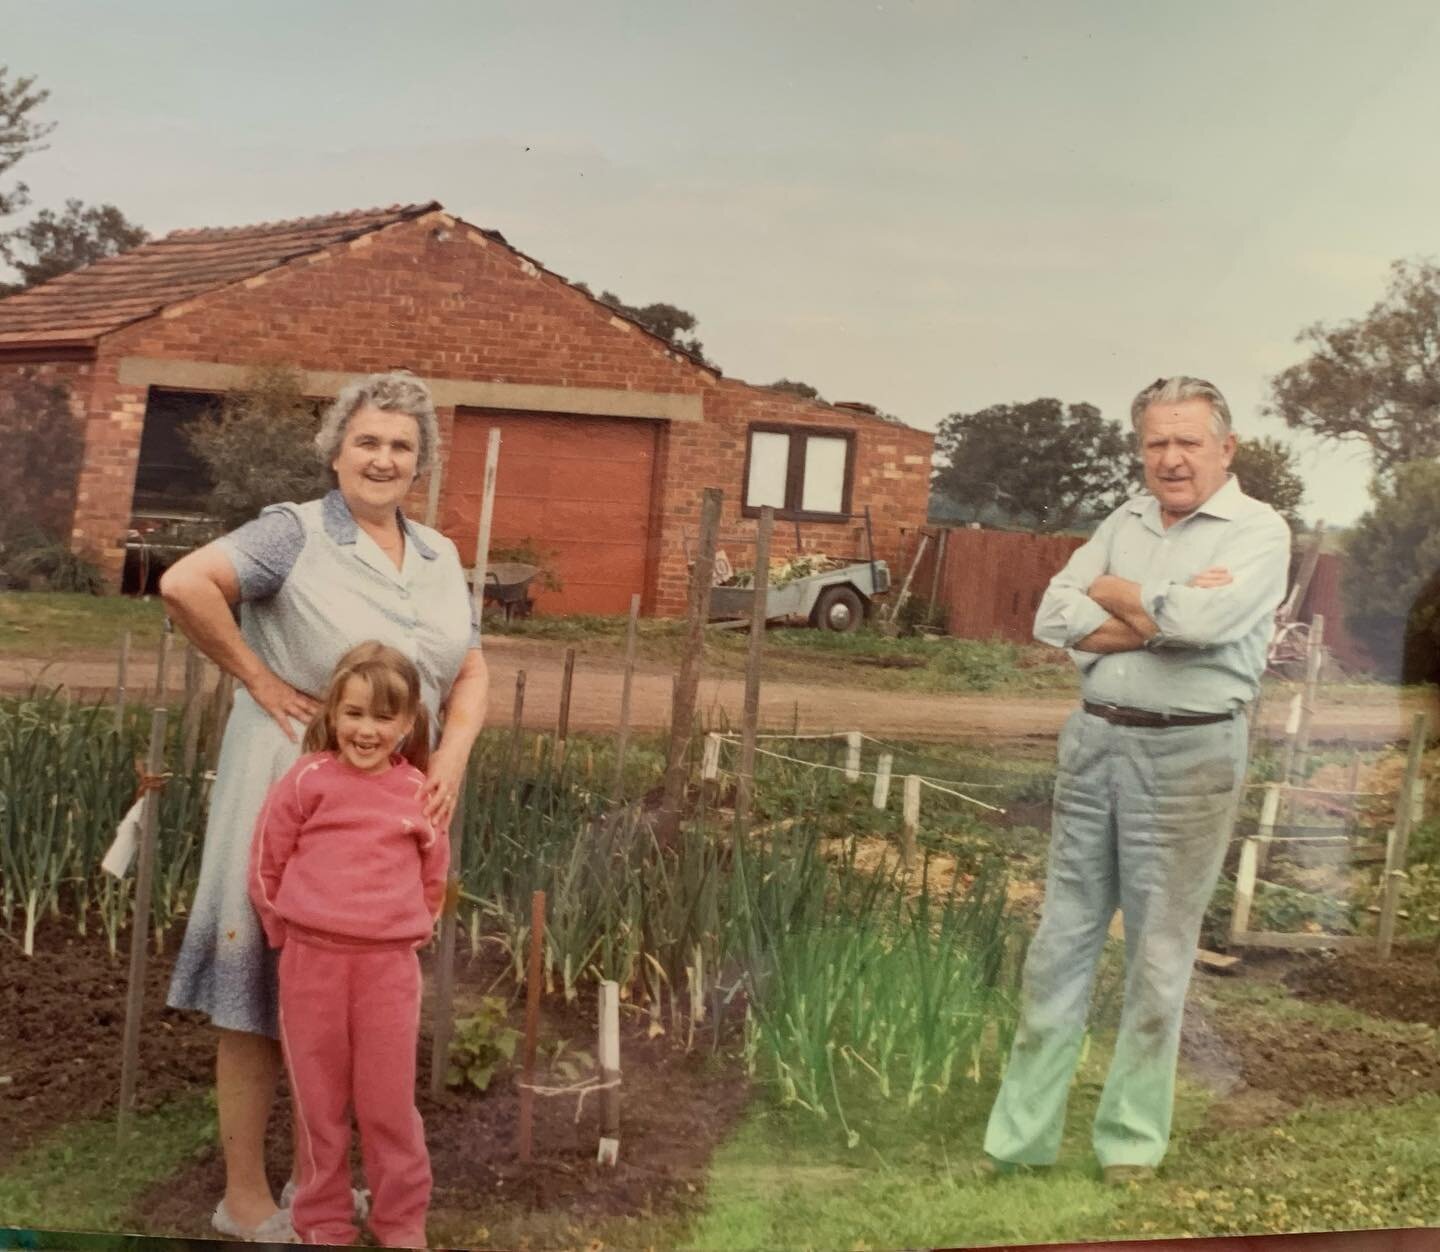 For many who follow a passion, there&rsquo;s often an instrumental person/moment or experience that helped to install that love&hellip;..
For me, it&rsquo;s these two very special people&hellip; My Grandparents&hellip; Migrated from war torn Europe i